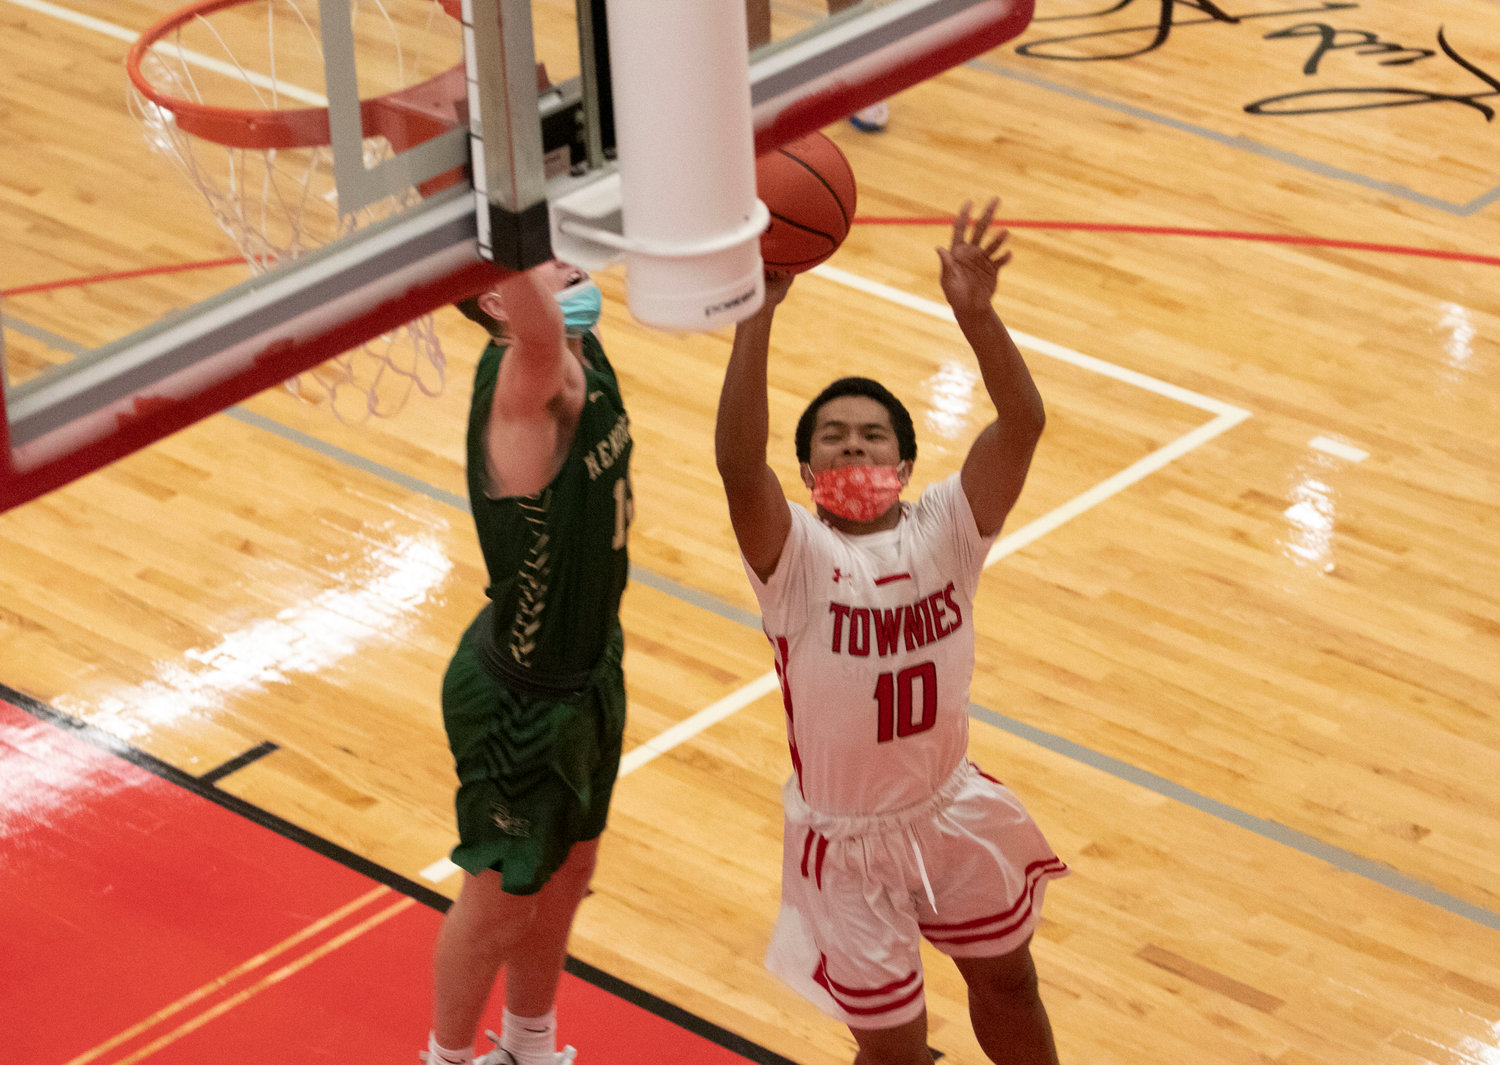 Denzy Suazo sinks a jumper in the third quarter.